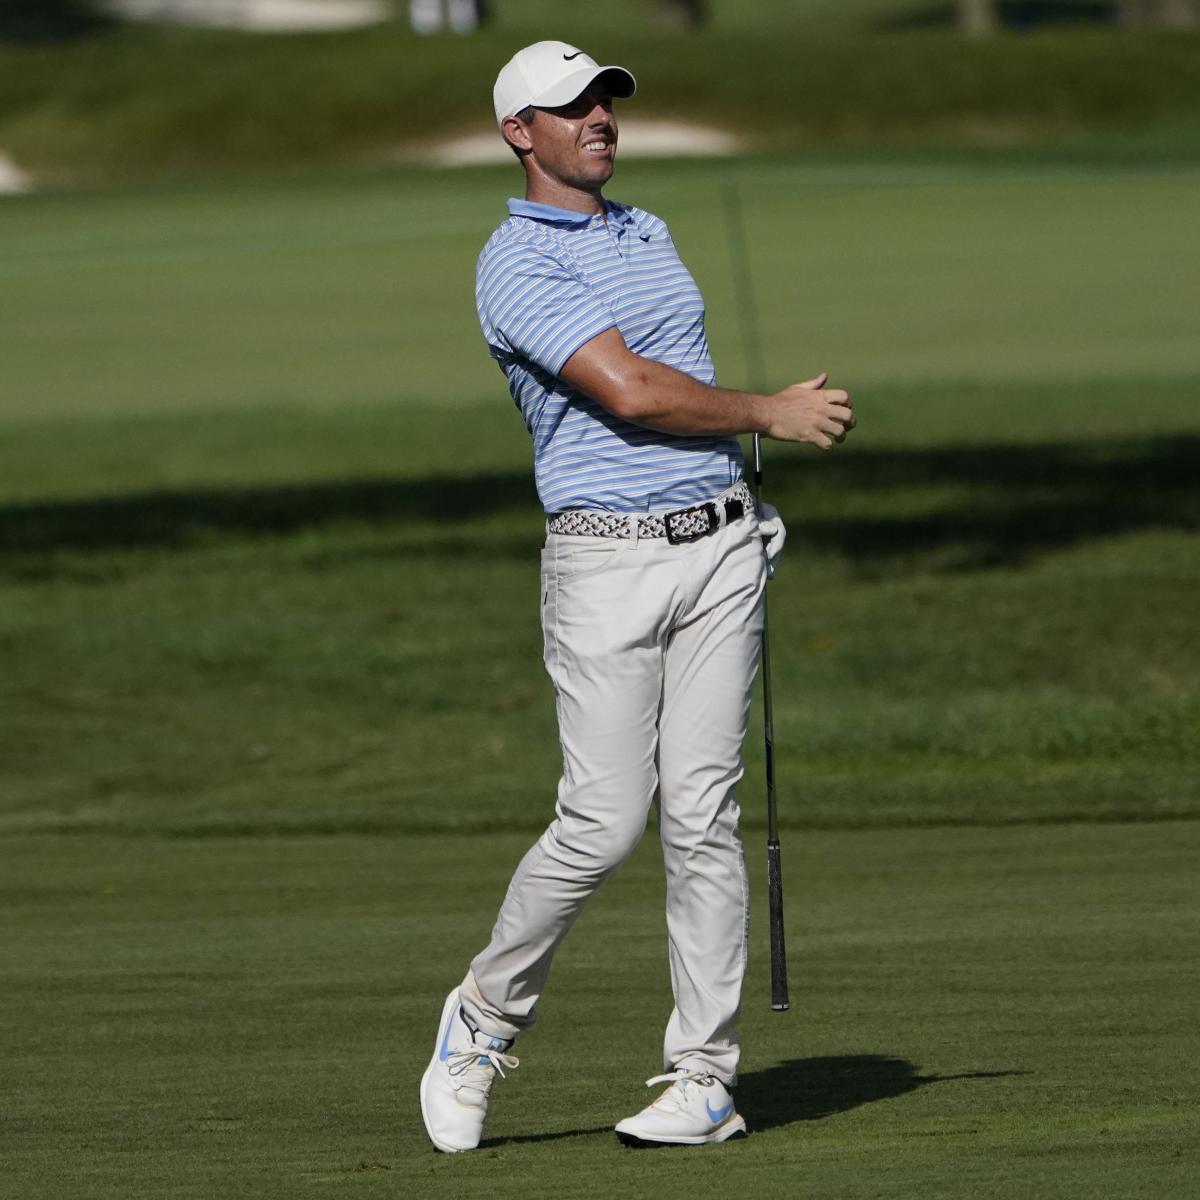 BMW Championship 2020: Rory McIlroy, Patrick Cantlay Tied for Lead After Round 2